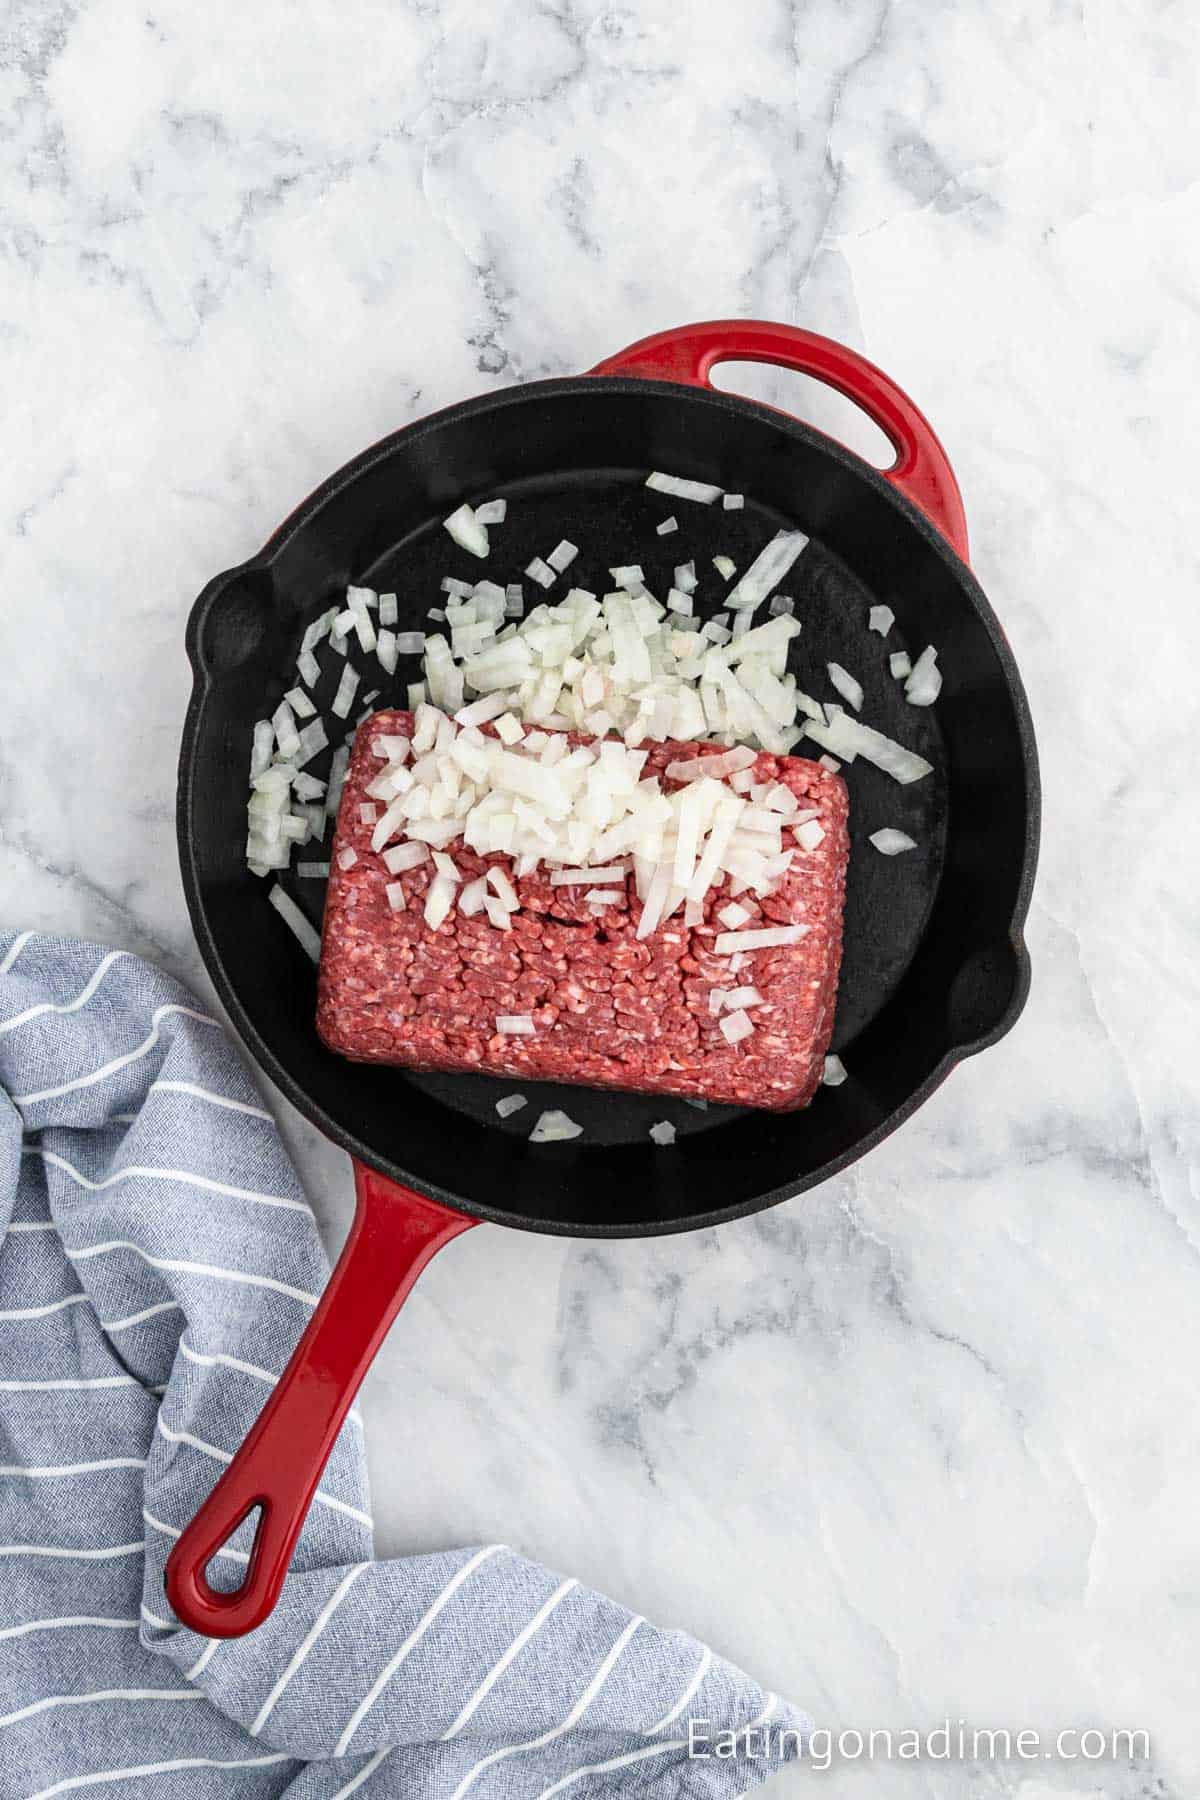 Cooking ground beef with chopped onions in a cast iron skillet